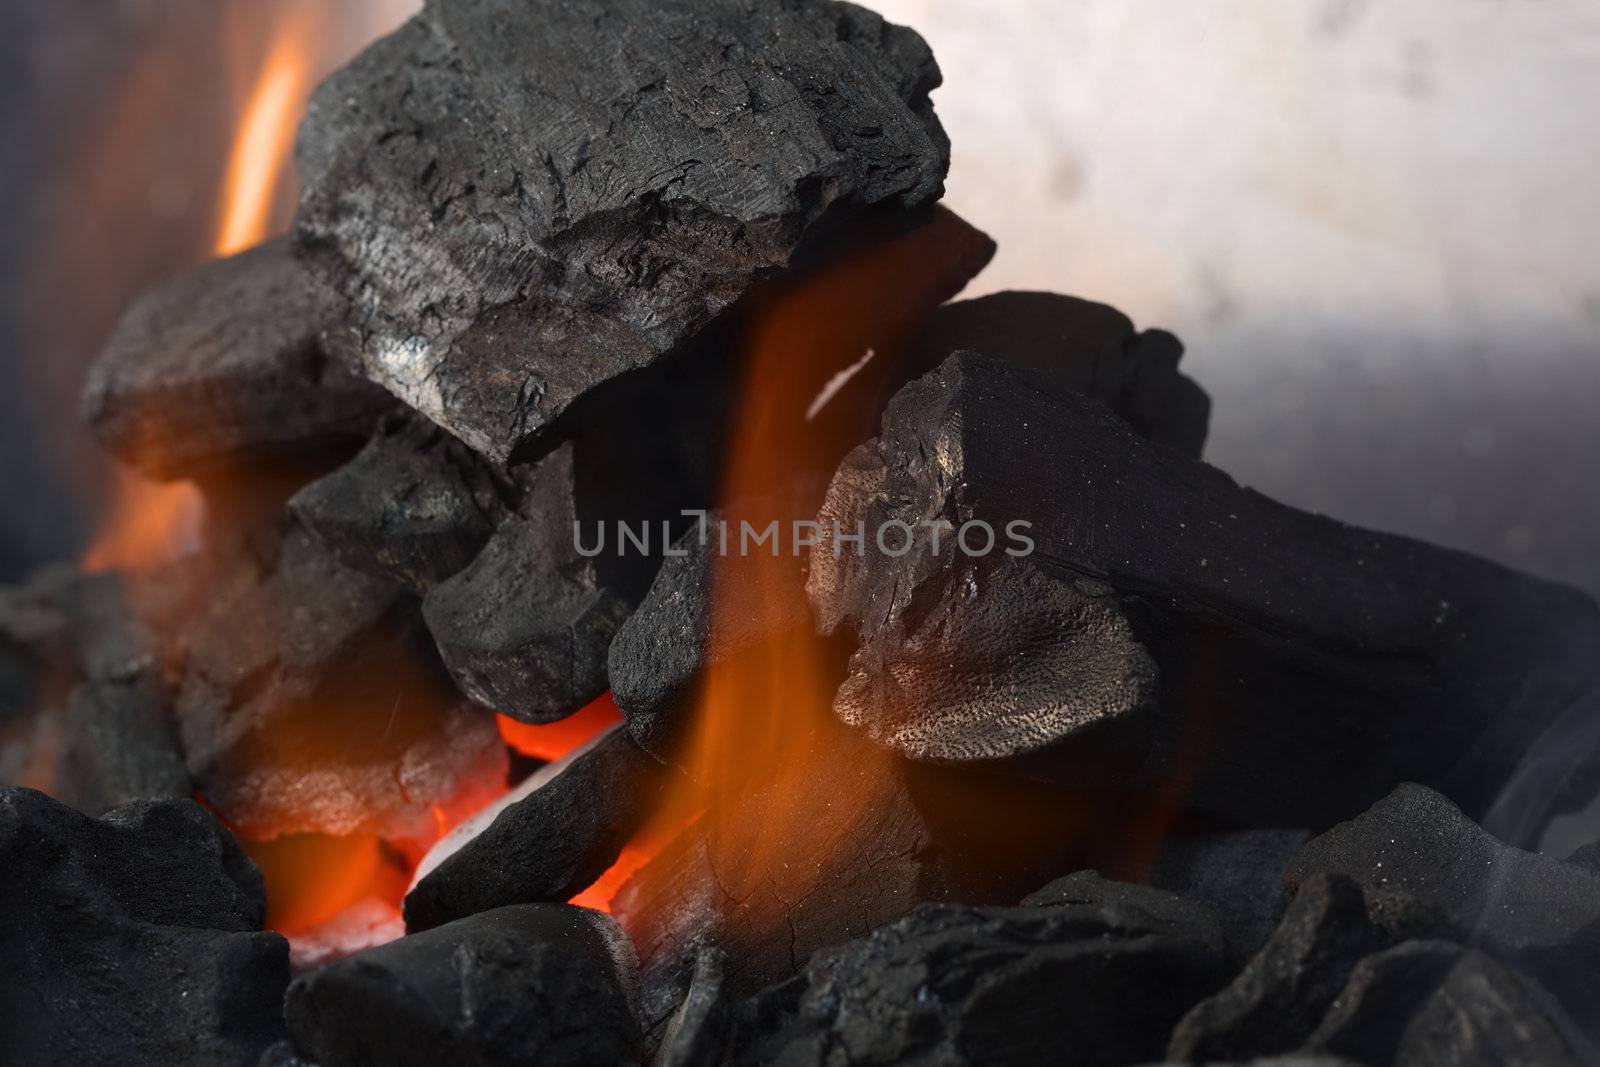 Burning charcoal with orange-colored flame and glow (Selective Focus, Focus on parts of the charcoal around the flame)